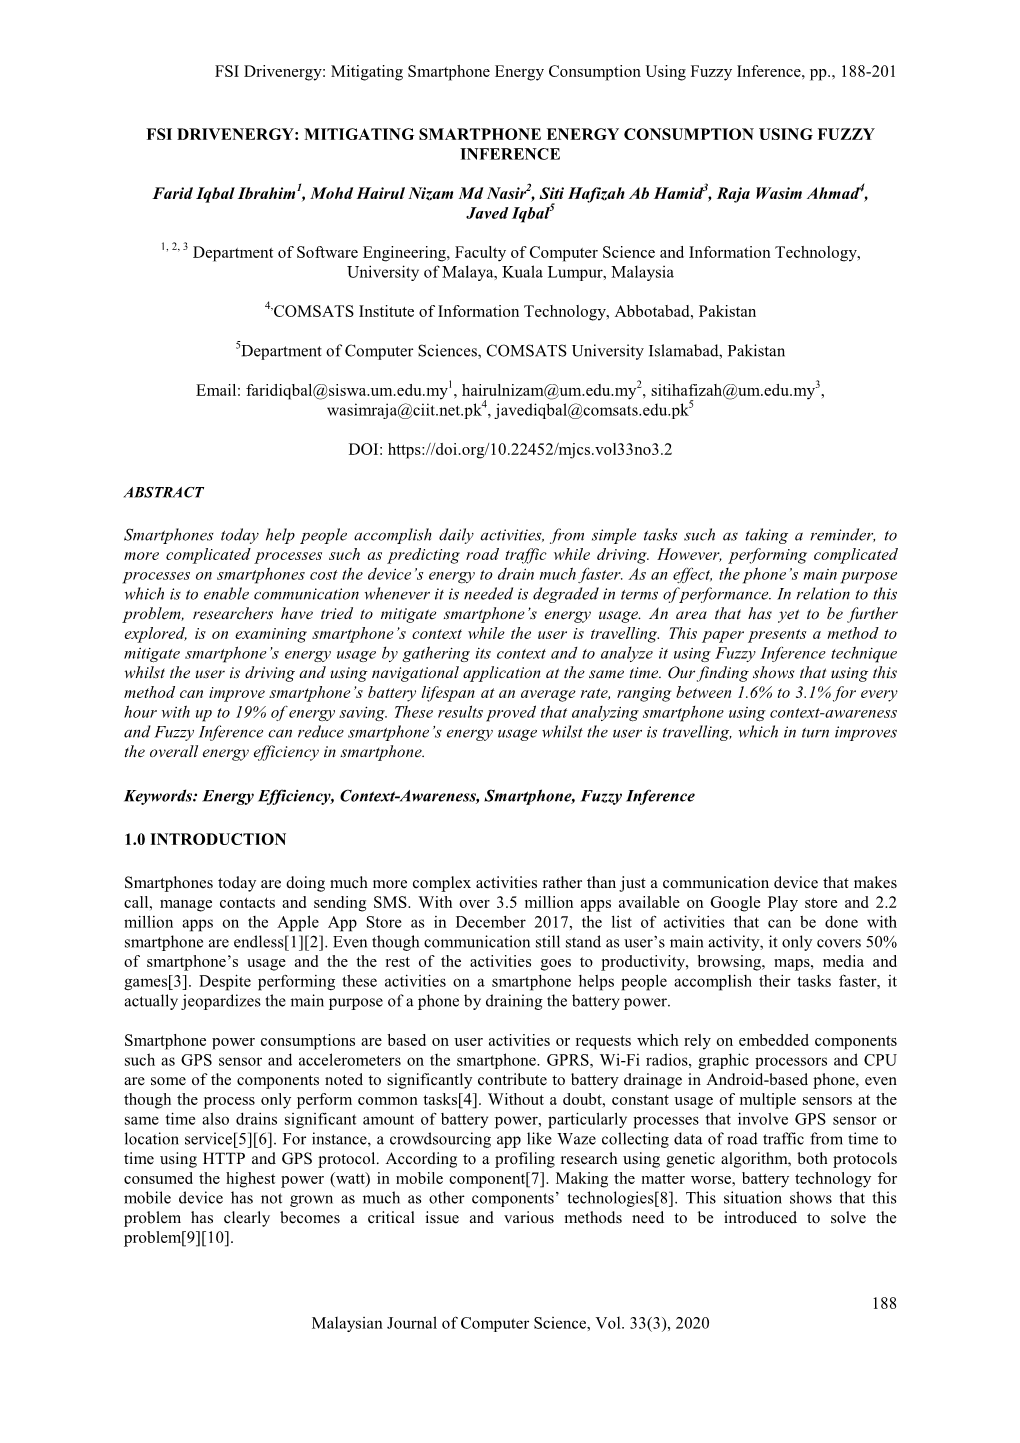 Mitigating Smartphone Energy Consumption Using Fuzzy Inference, Pp., 188-201 188 Malaysian Journal of Computer S